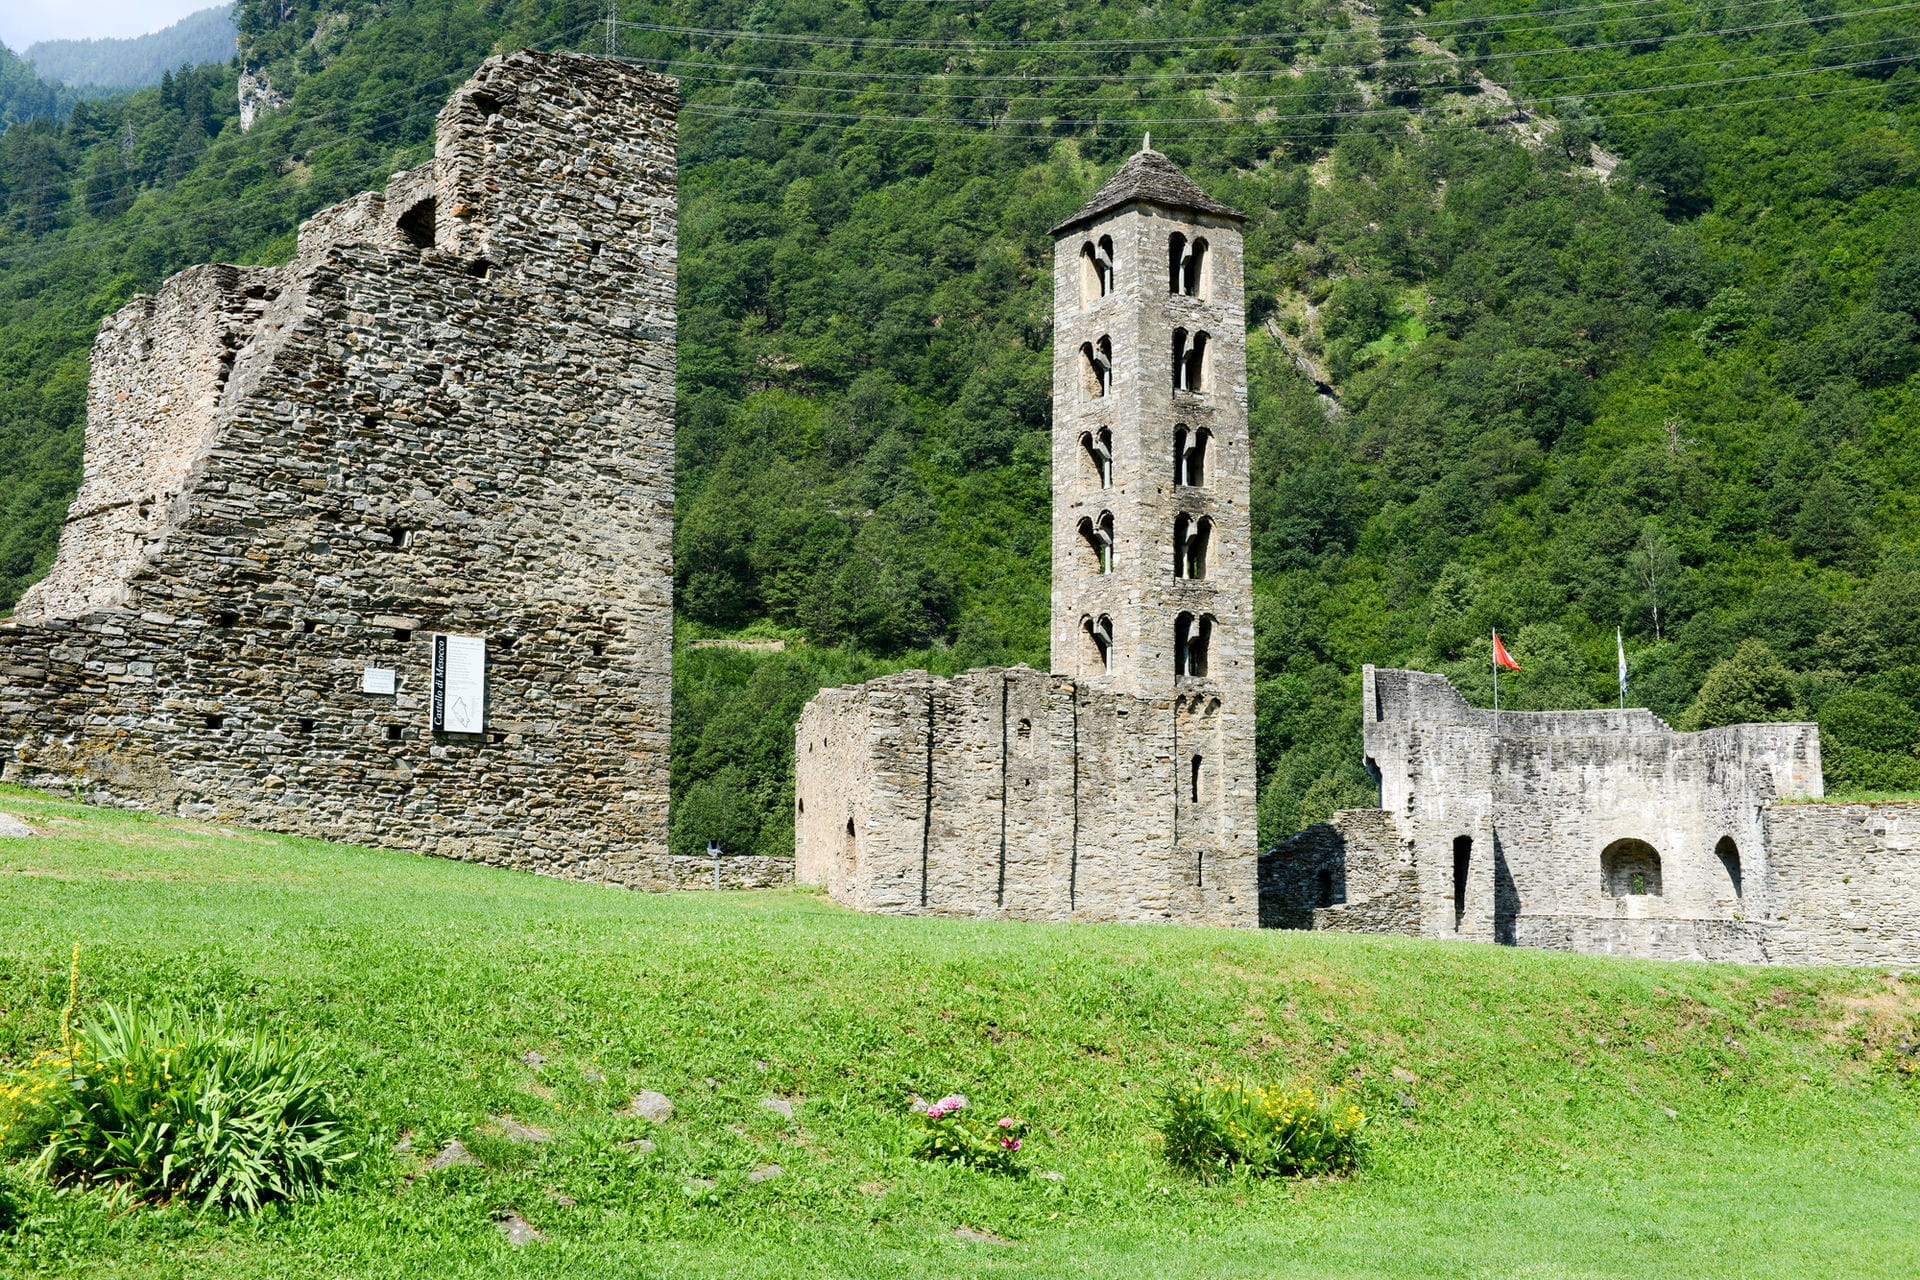 High quality hoto of Mesocco Castle - Switzerland